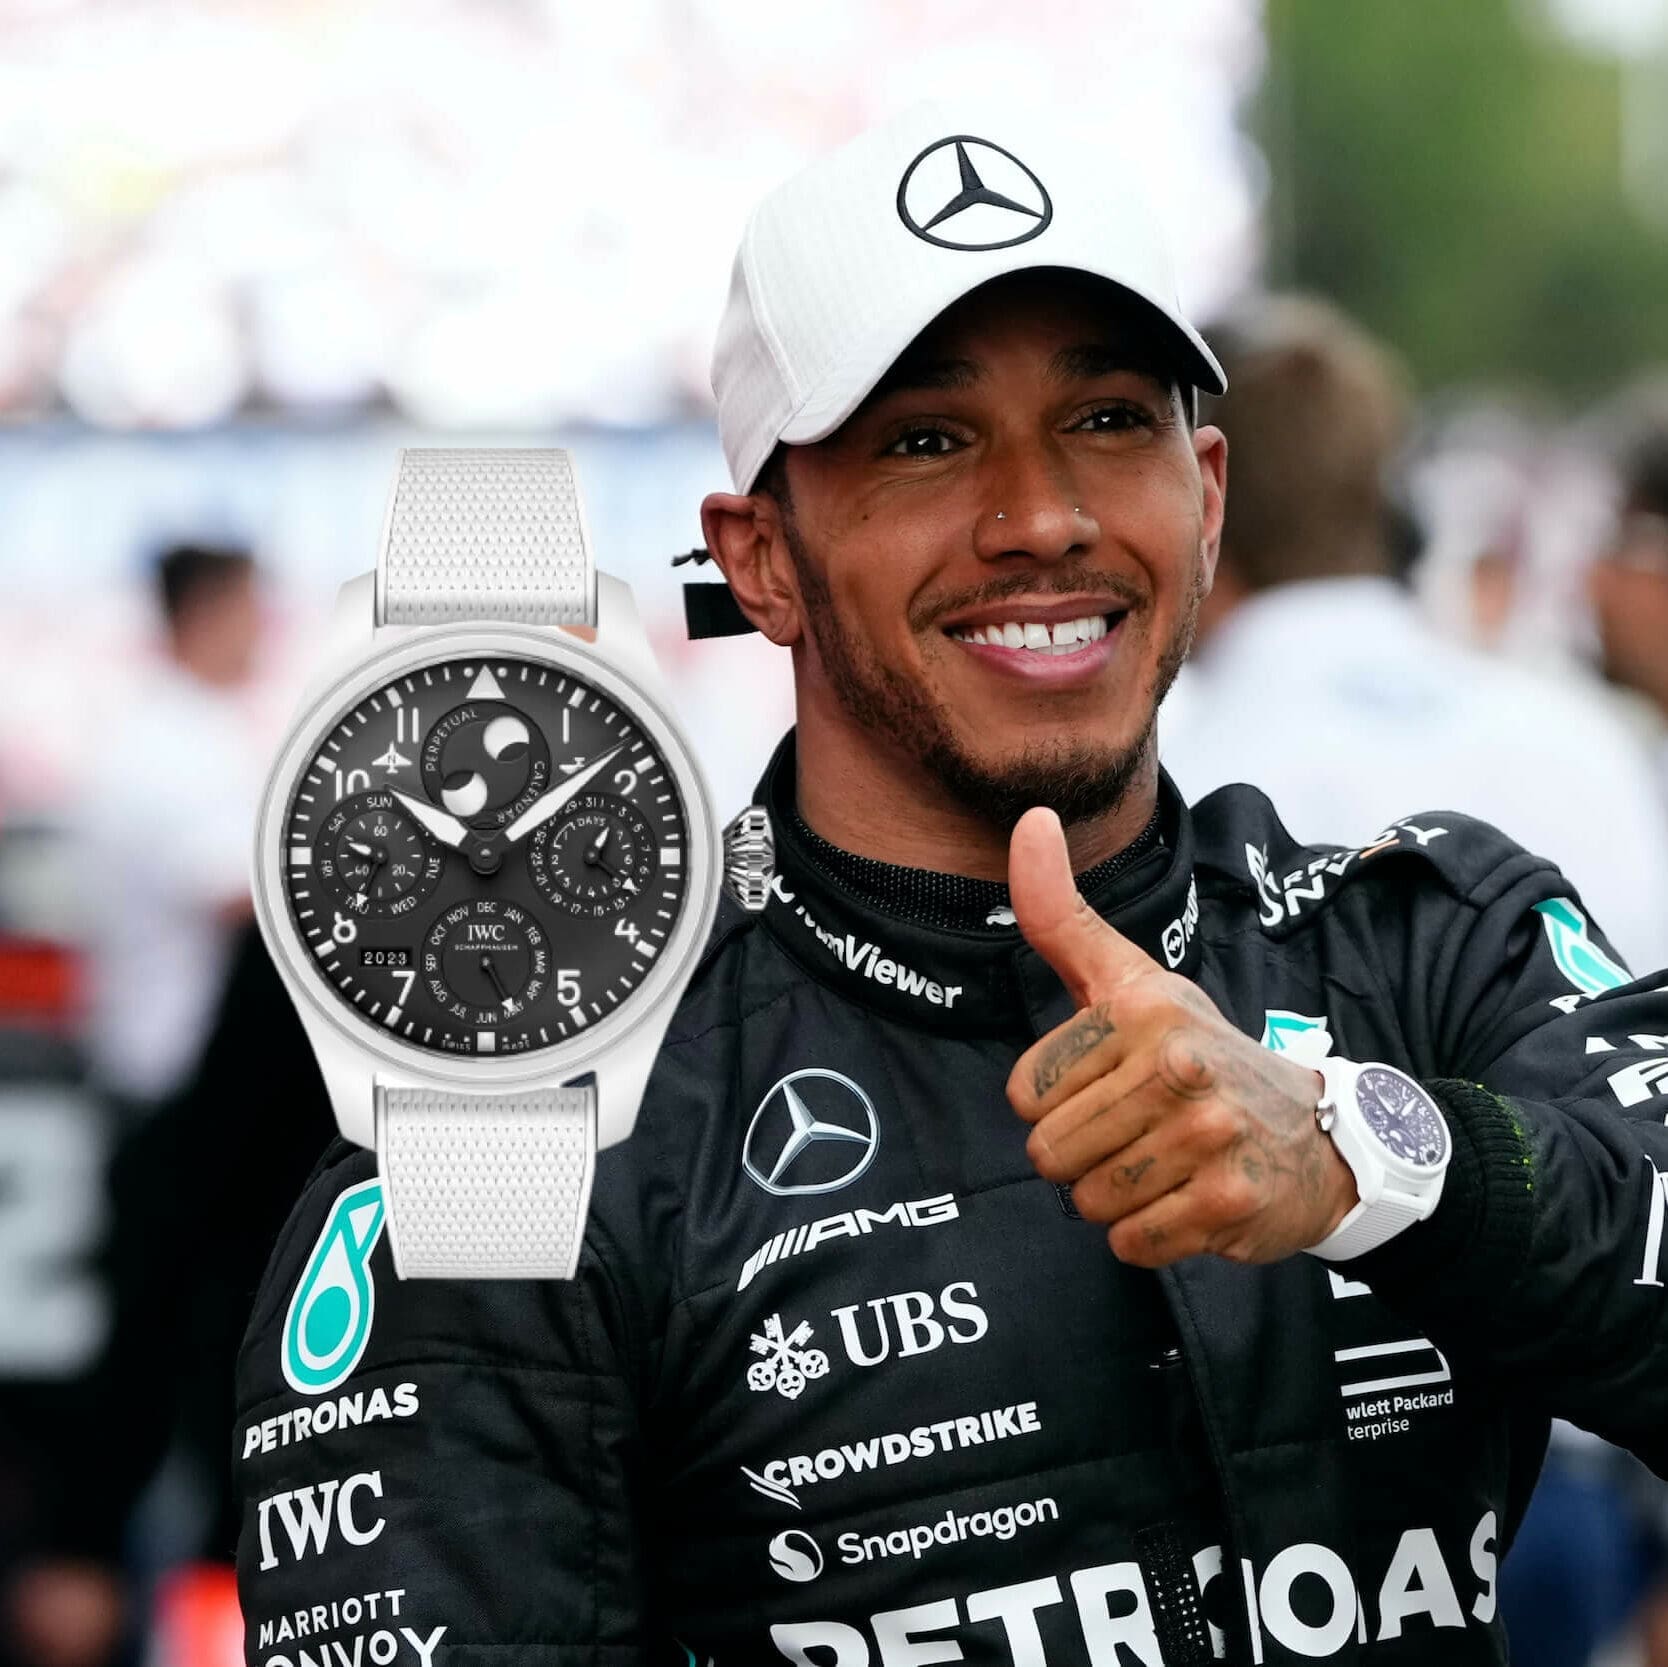 Remember that unreleased IWC Big Pilot’s Watch Perpetual Calendar Top Gun Lake Tahoe Lewis Hamilton was caught wearing? Well it is OUT NOW!